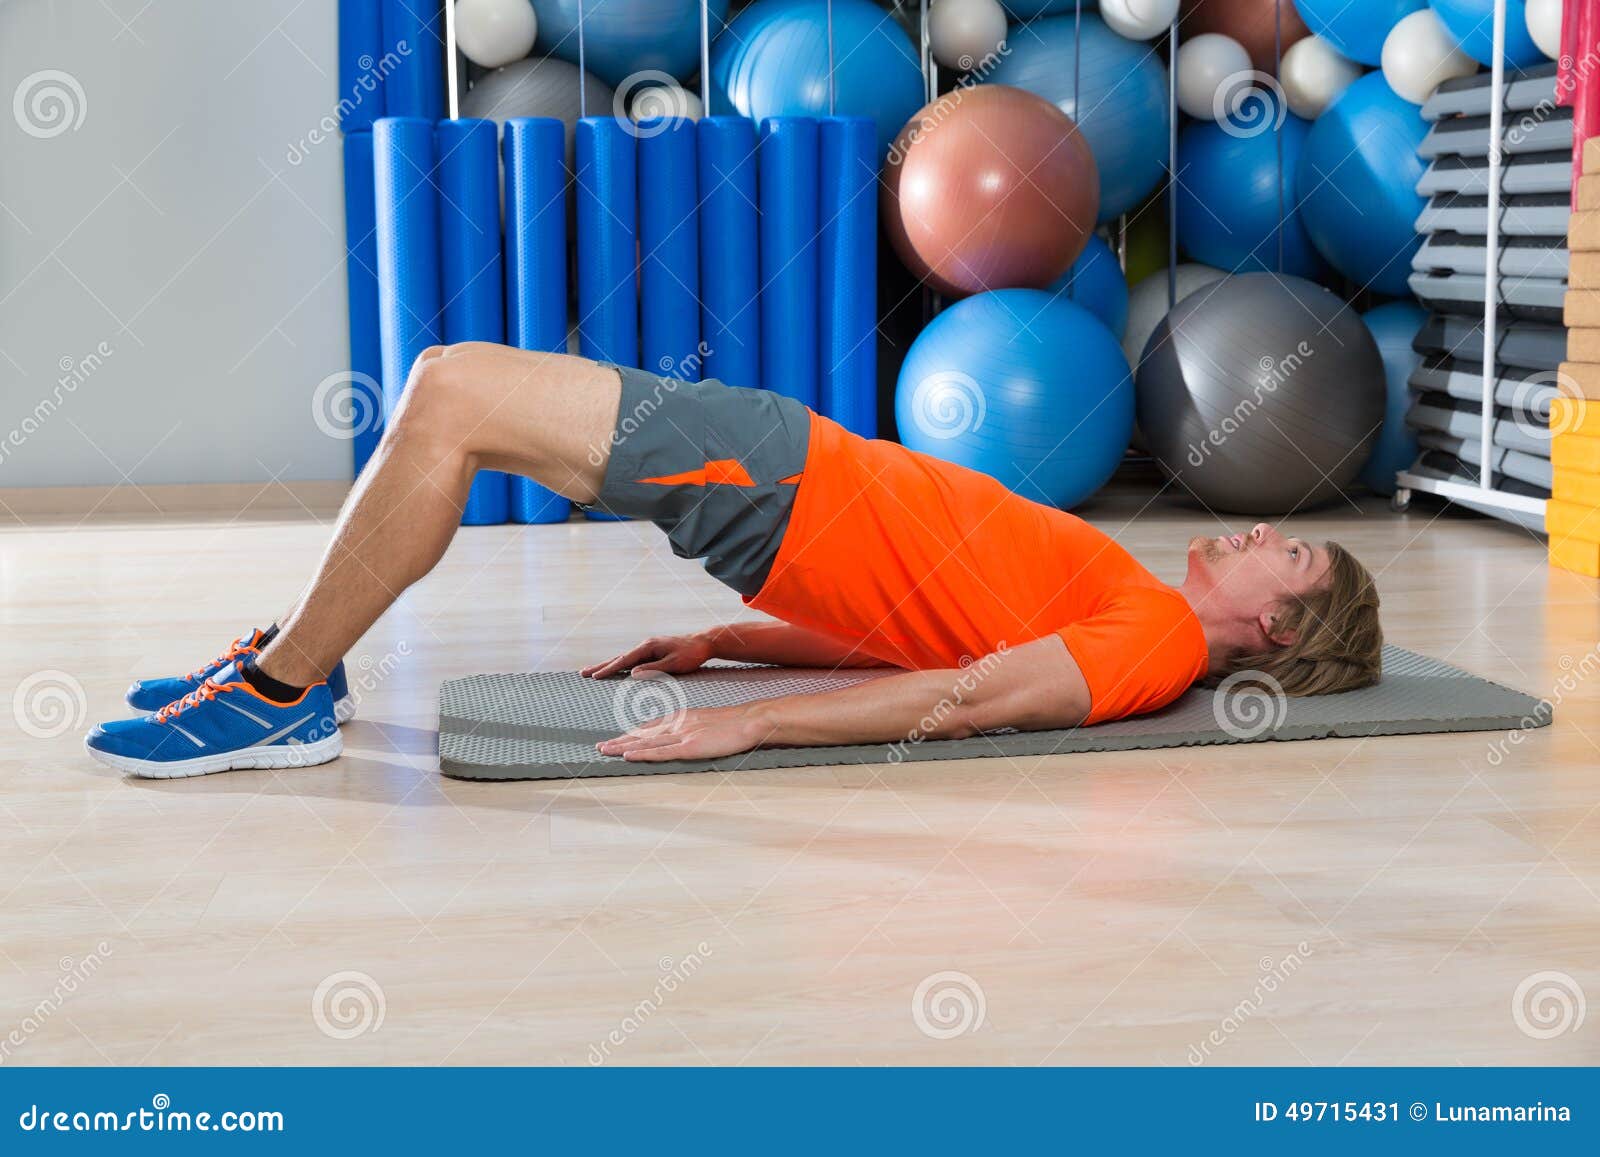 Woman Doing Exercise with Hip Lift. Stock Vector - Illustration of